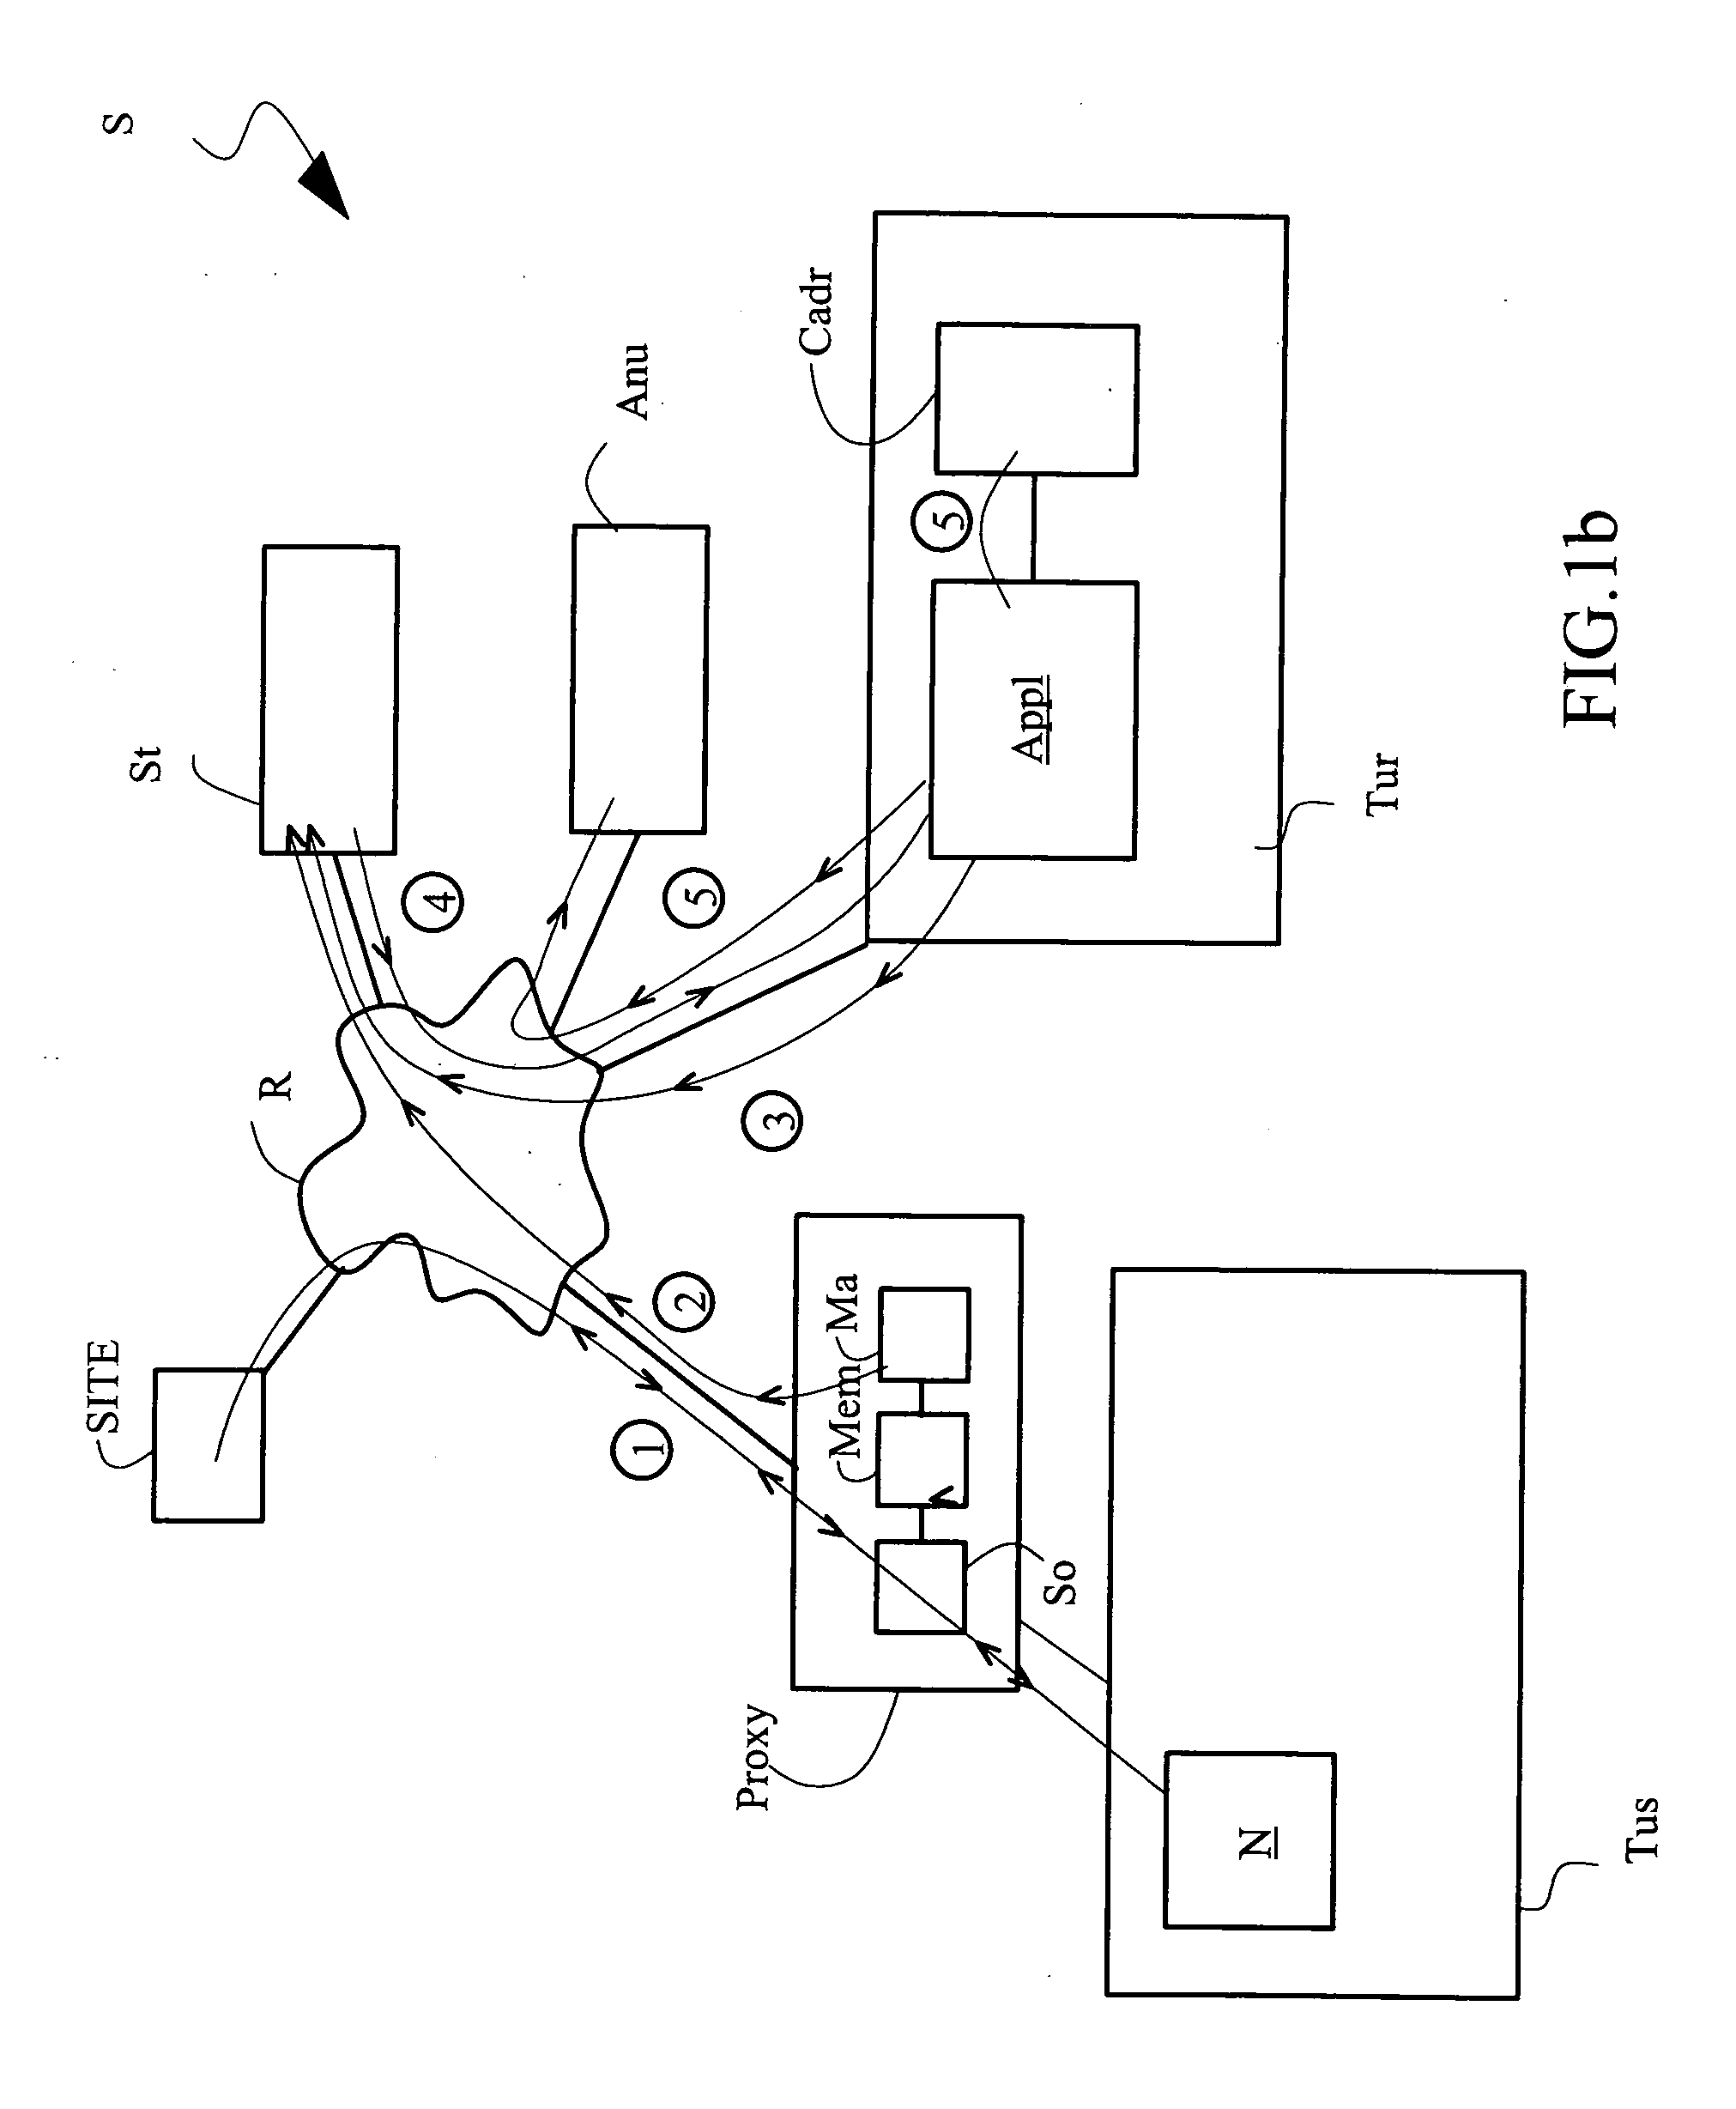 Method for accessing data concerning at least one user enabling said user to be contacted subsequently